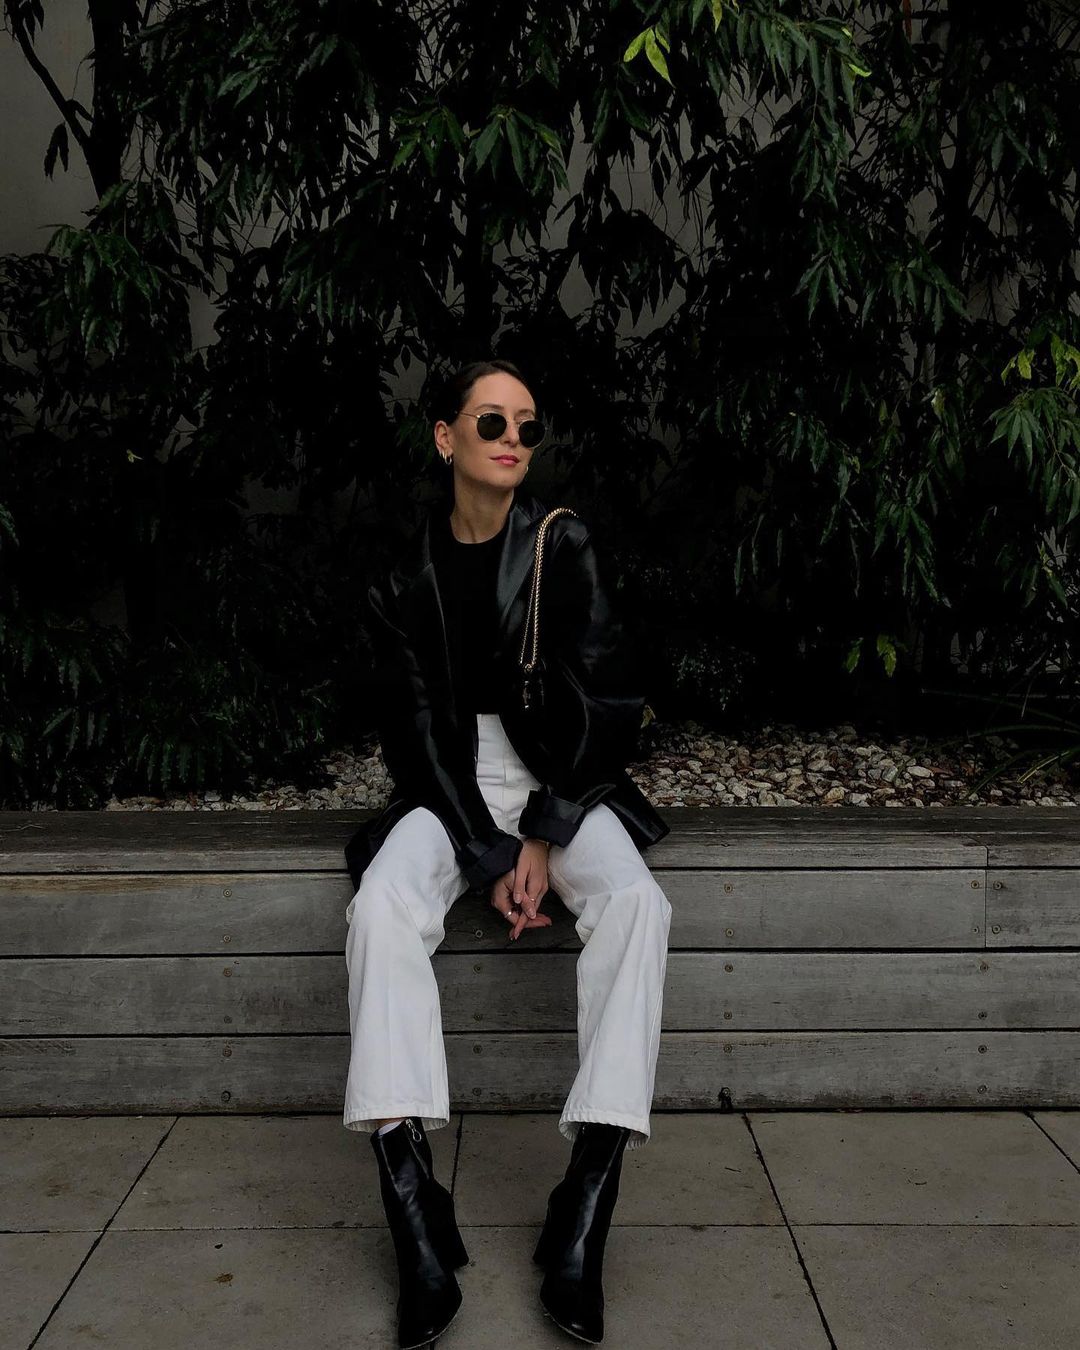 Le Fashion: Jess Alizzi's Outfit Is Filled With Cool-Girl Essentials